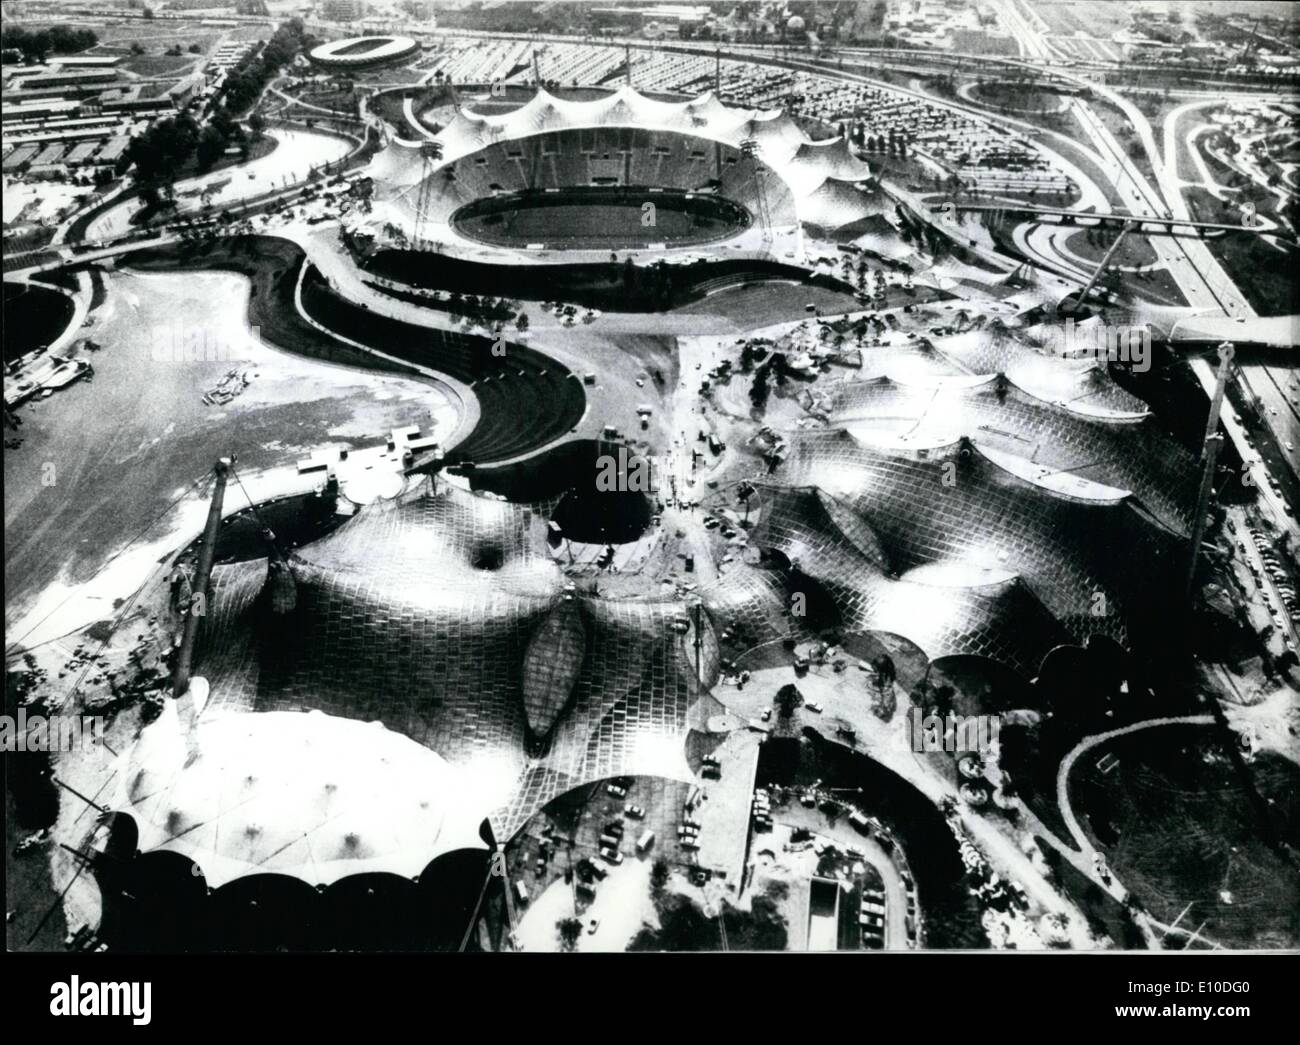 Jul. 07, 1972 - Munich Olympic Sites The acrylic glass roof which spans the Olympic Stadium, the indoor sports hall and the swimming stadium (in the foreground) is over 800,000 square feet in area. The cycling stadium is visible in the rear to the left. Stock Photo